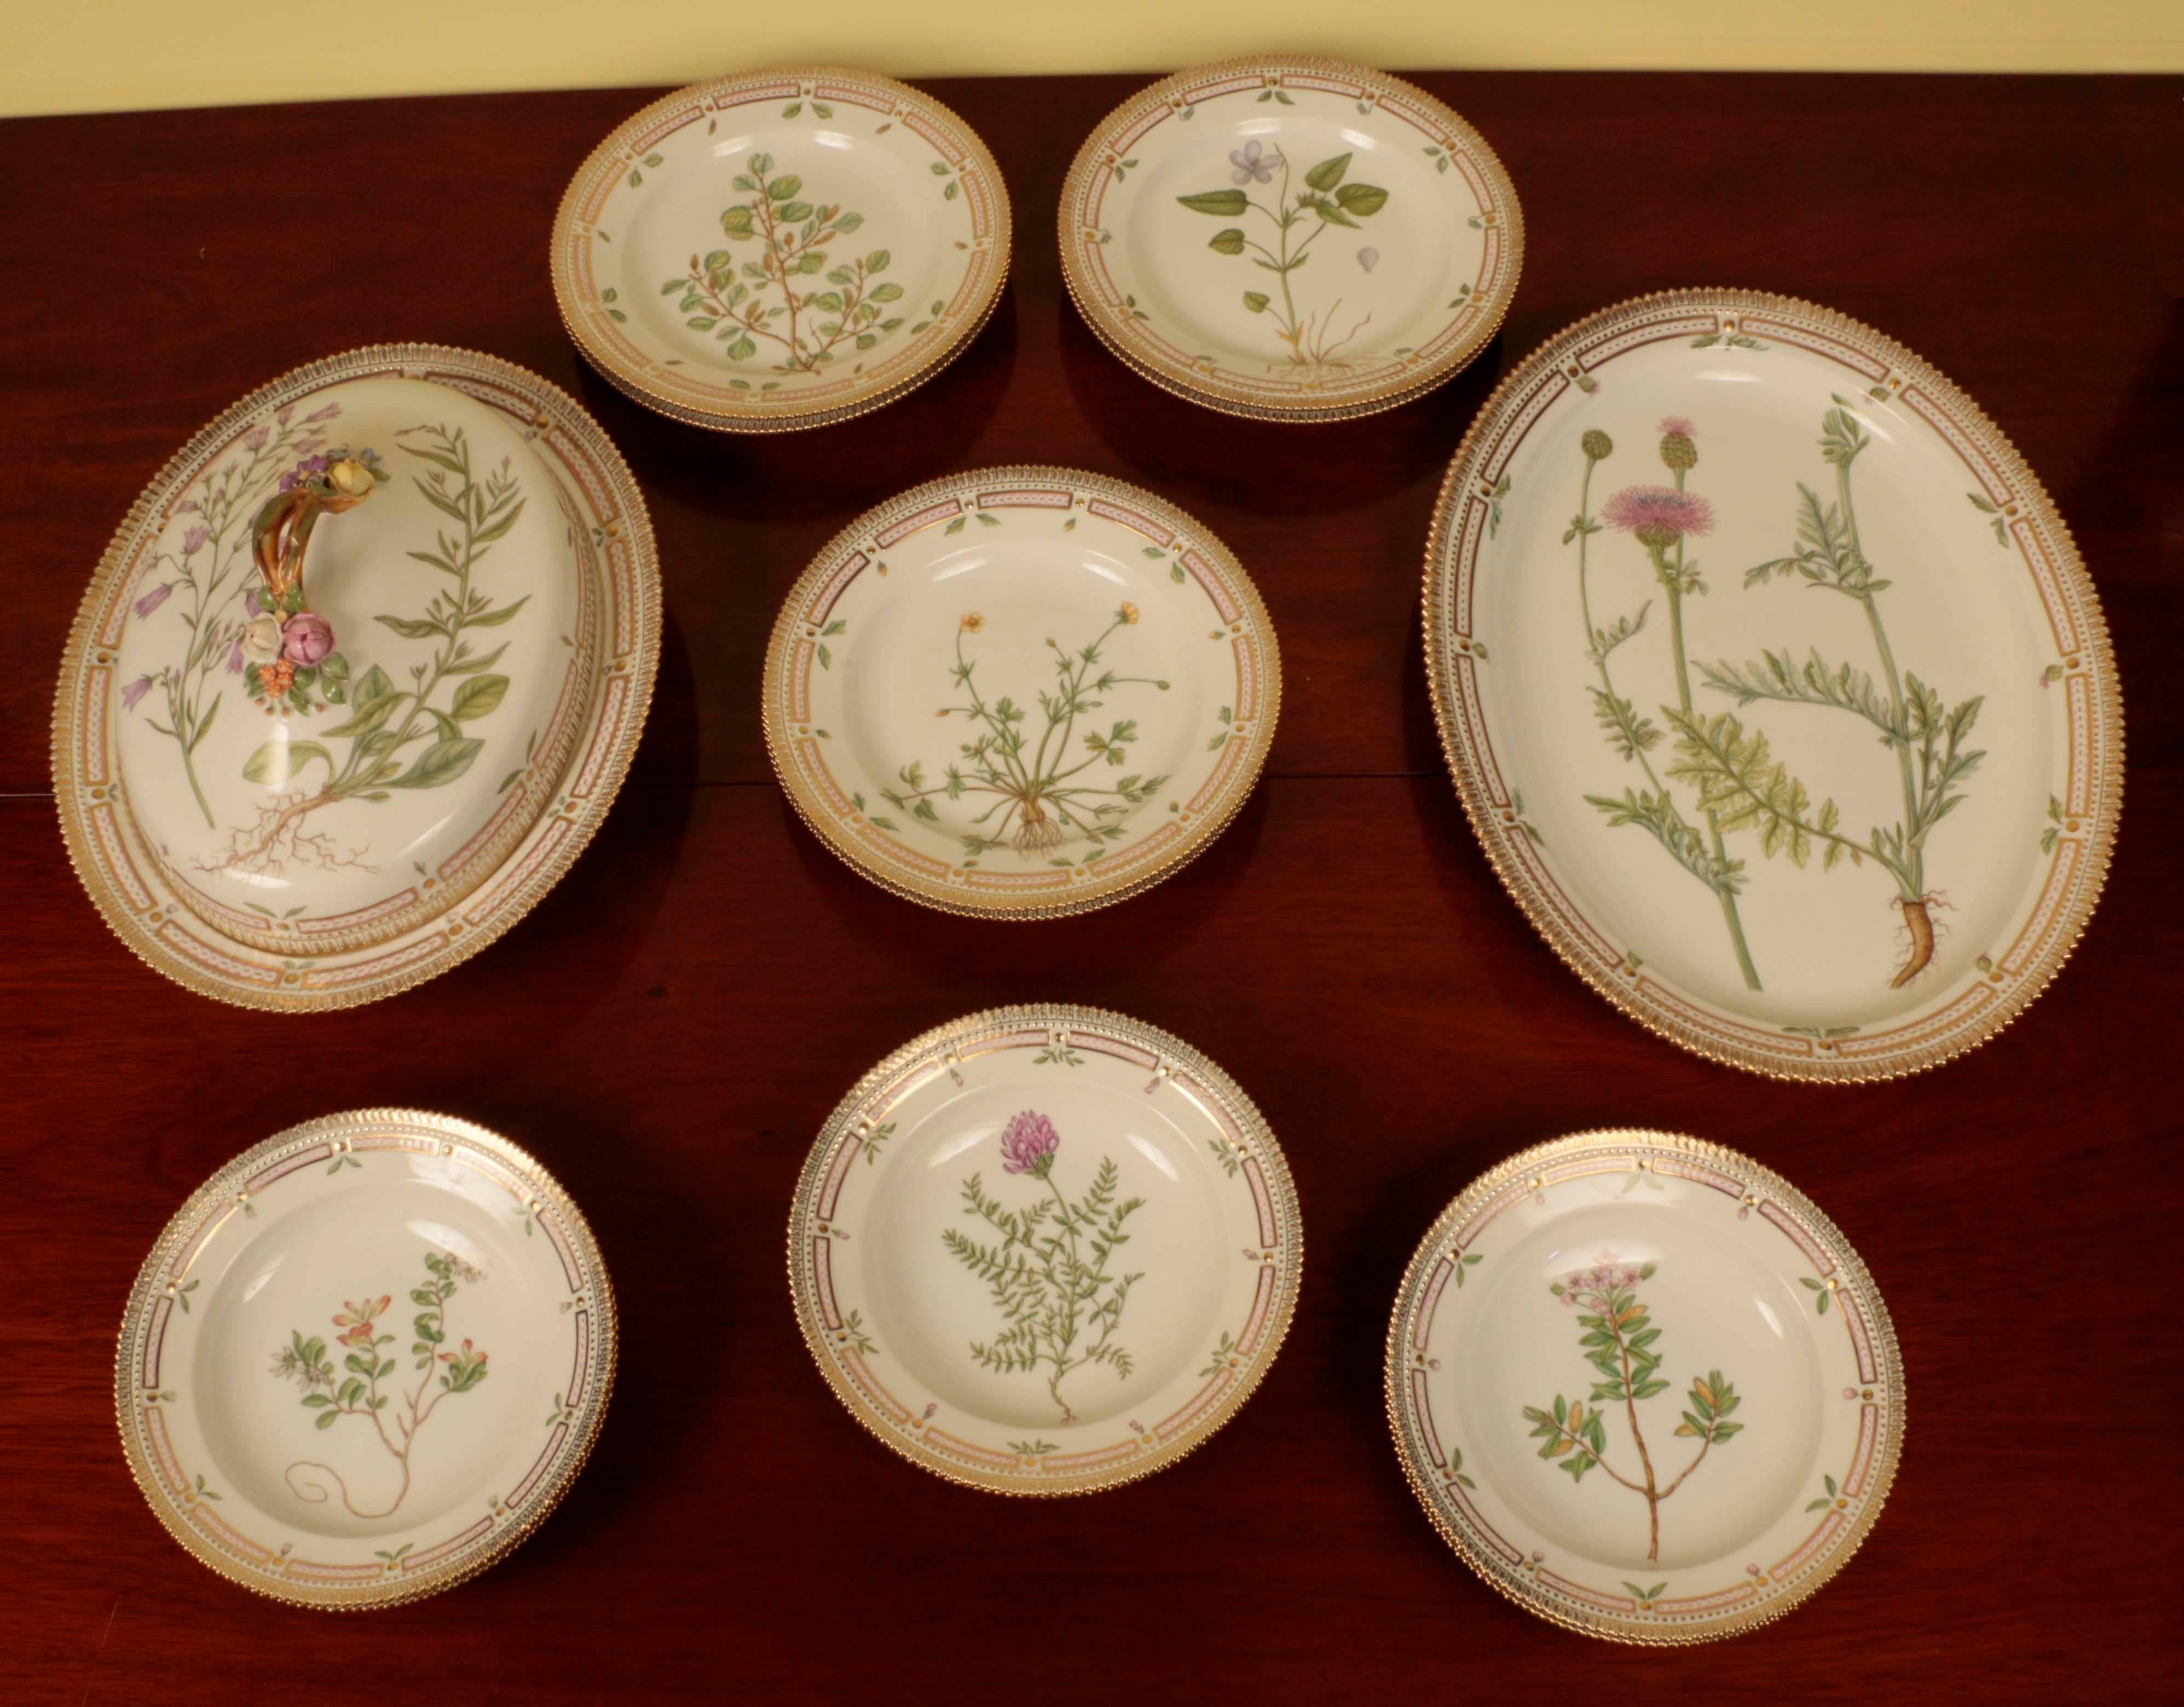 A part service of Royal Copenhagen Flora Danica porcelain. Each piece hand-painted with wildflowers within a moulded gilt and pink border.
Comprising:
A large oval meat or poultry plate beautifully painted with thistles; “Ceritaurea Scabiosa” 18 X